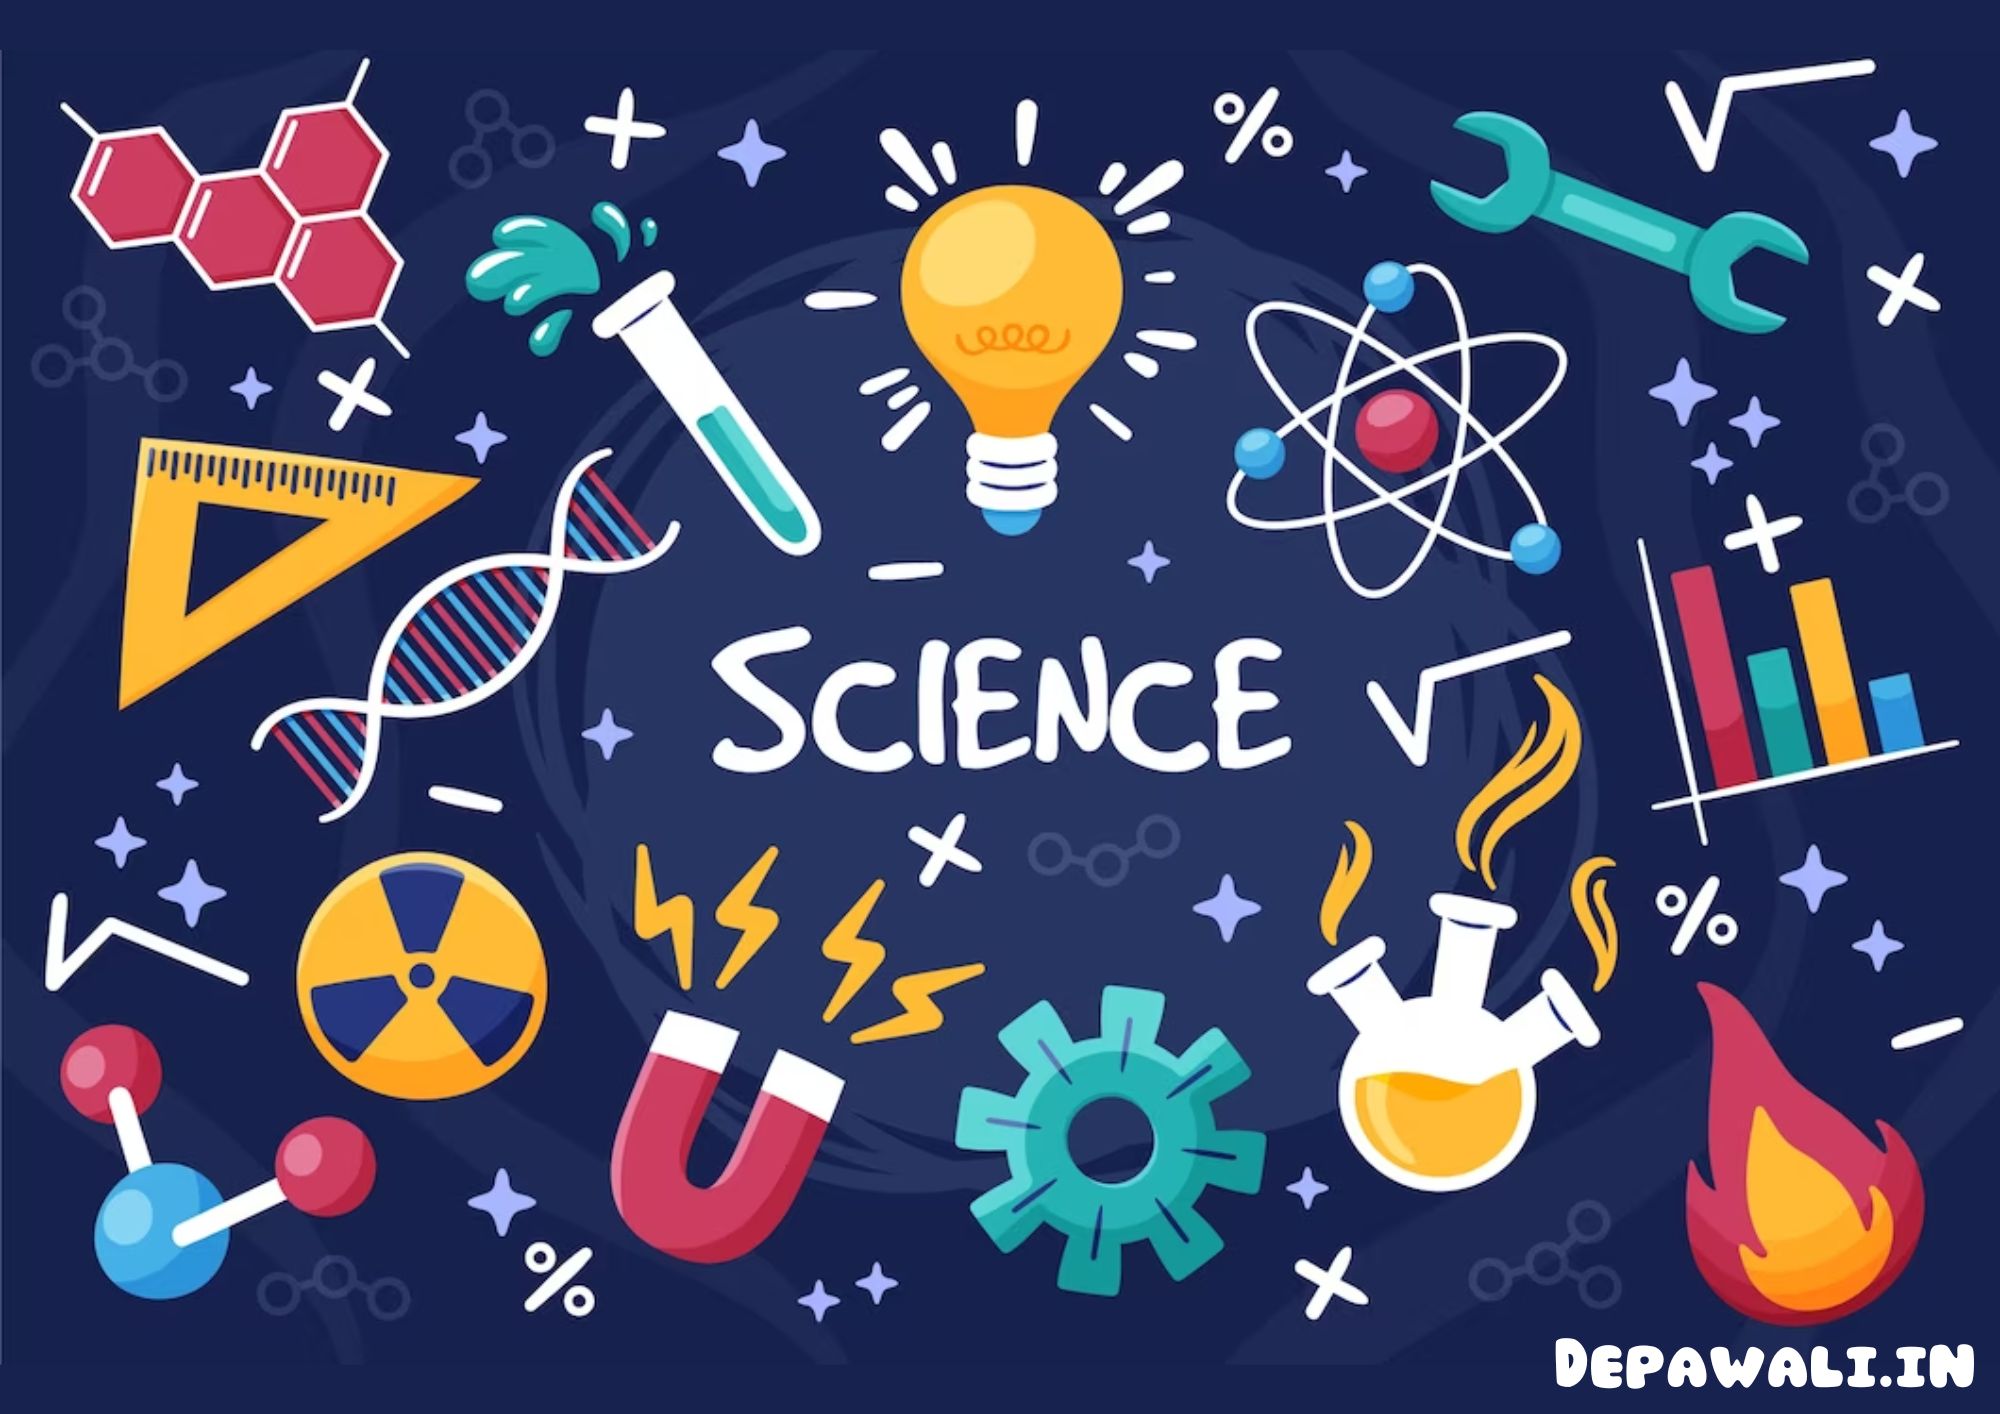 विज्ञान के रोचक तथ्य (Facts About Science In Hindi) - Science Interesting Facts In Hindi - Science Facts In Hindi